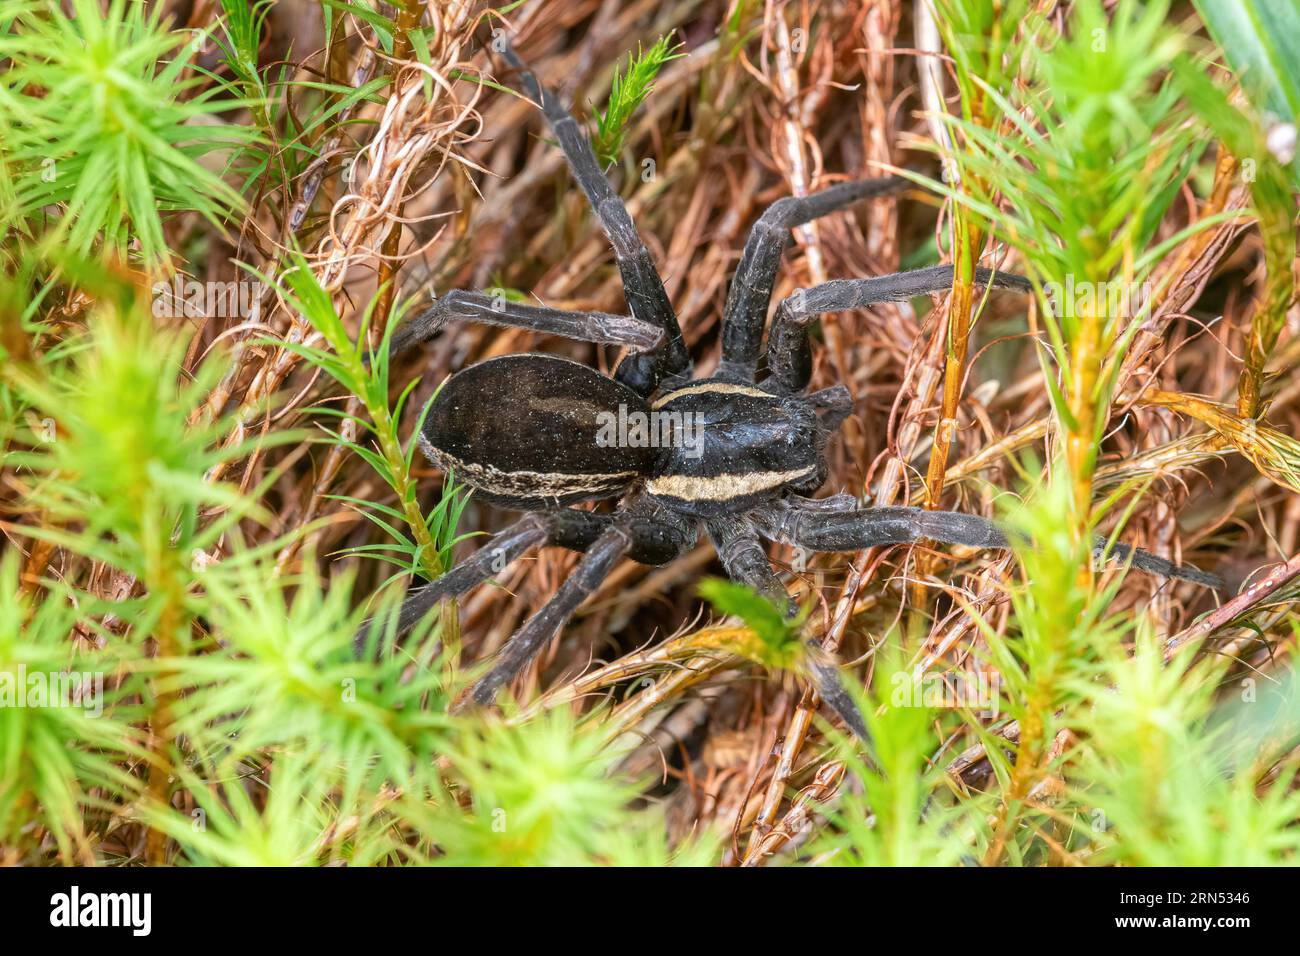 Raft spider (Dolomedes fimbriatus), close-up of a female spider on moss close to a pond, UK Stock Photo